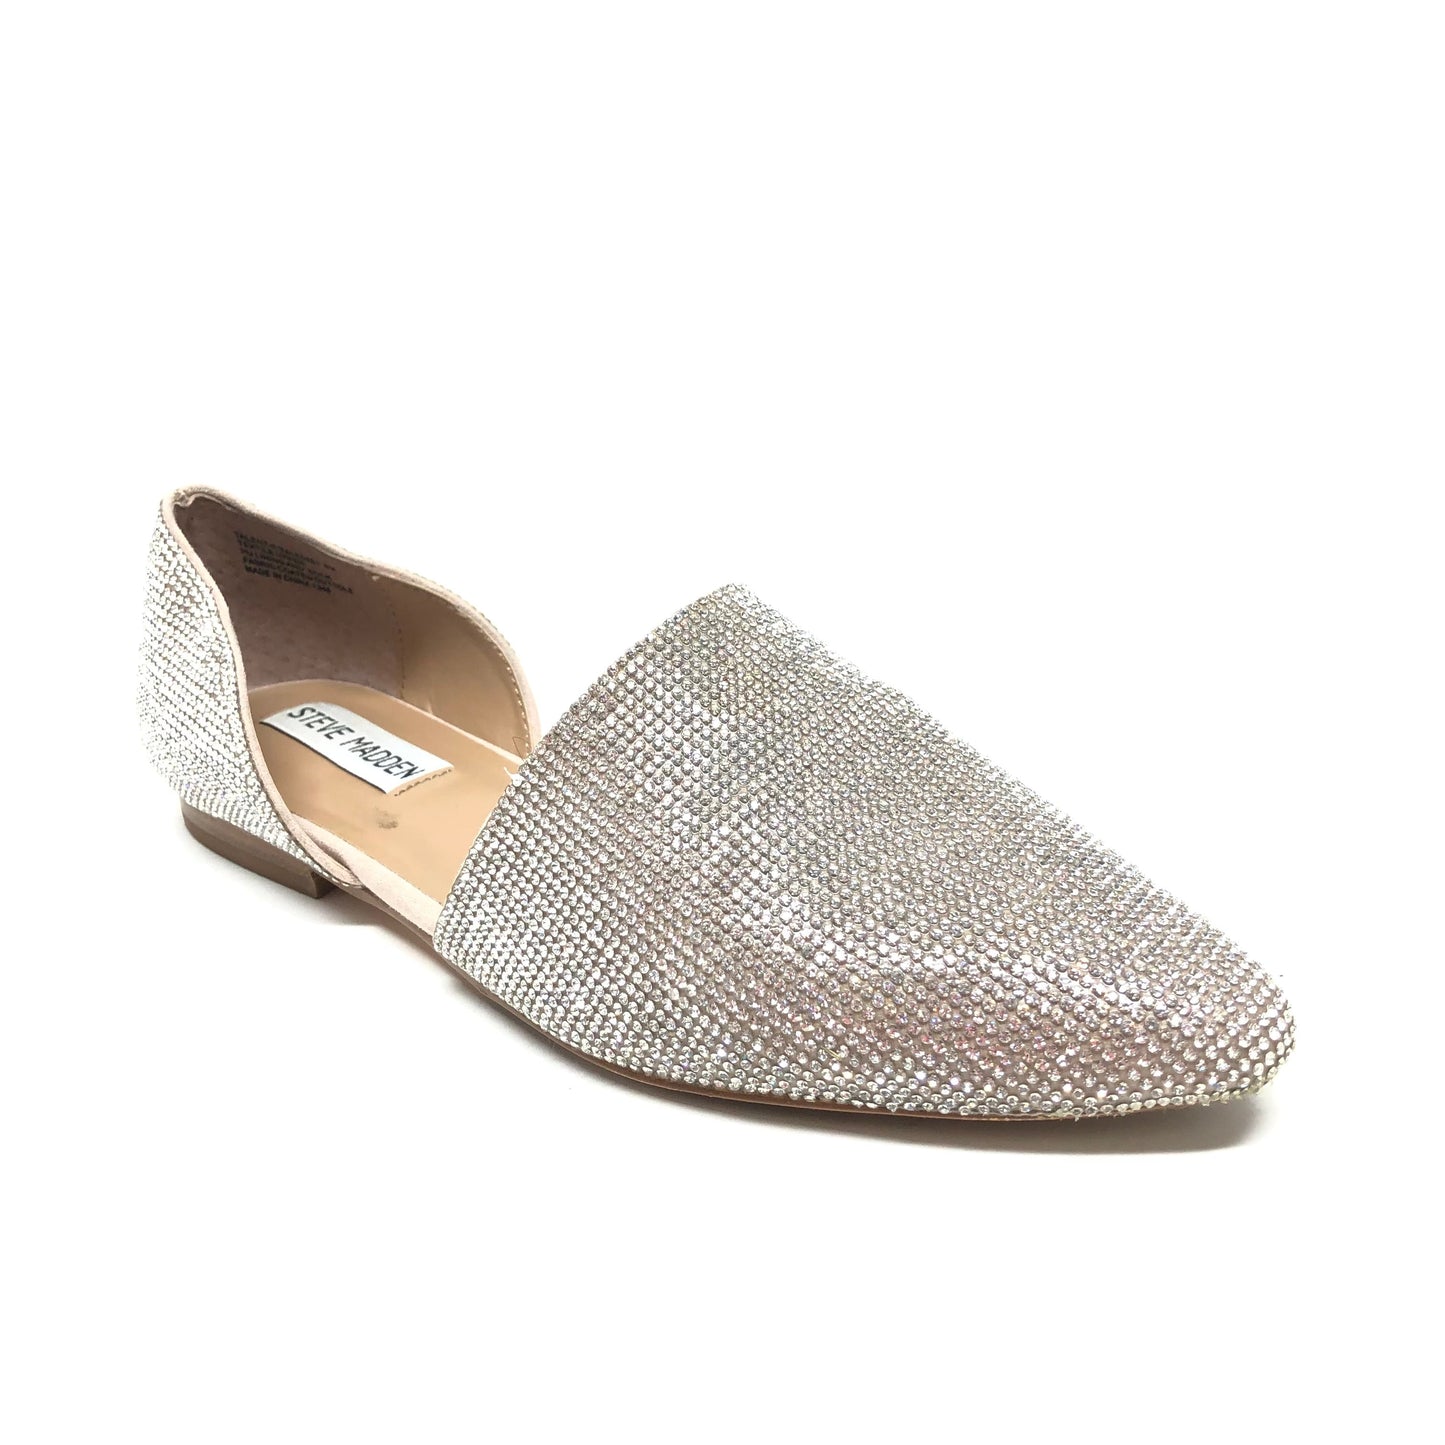 Silver Shoes Flats Steve Madden, Size 8